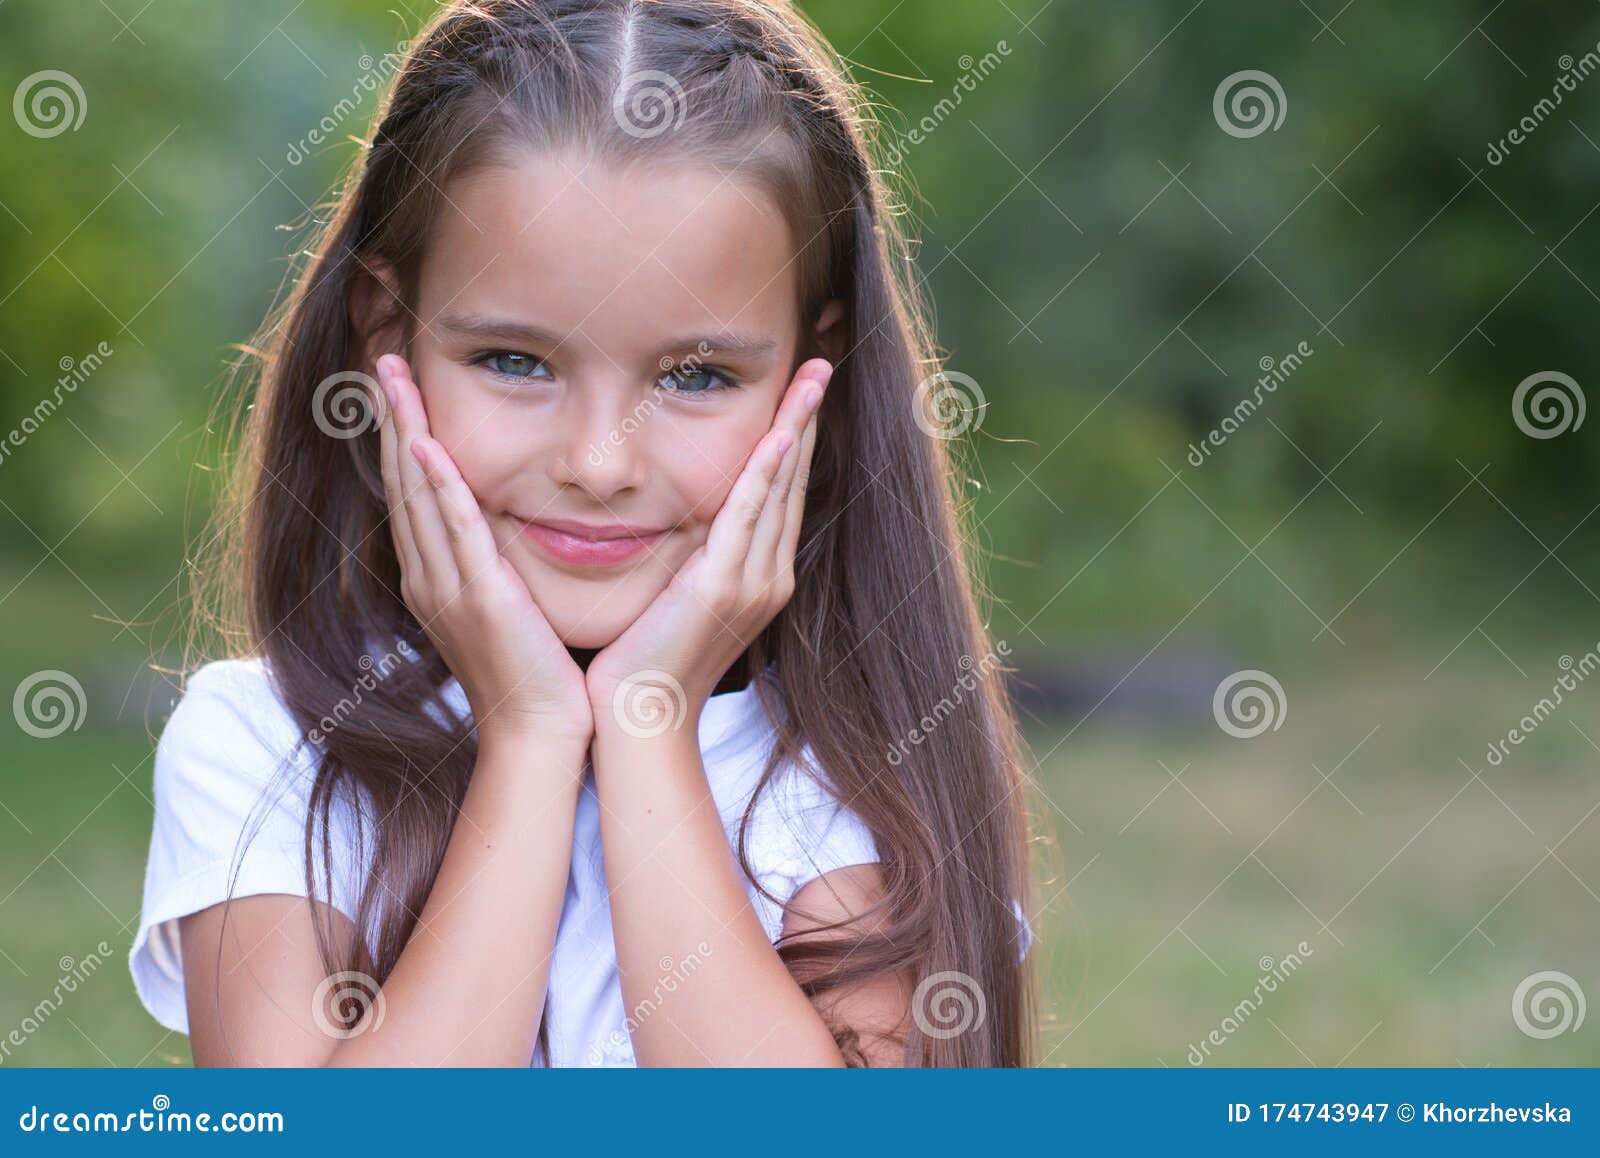 Pretty Little Girl with Long Brown Hair Posing Summer Nature ...